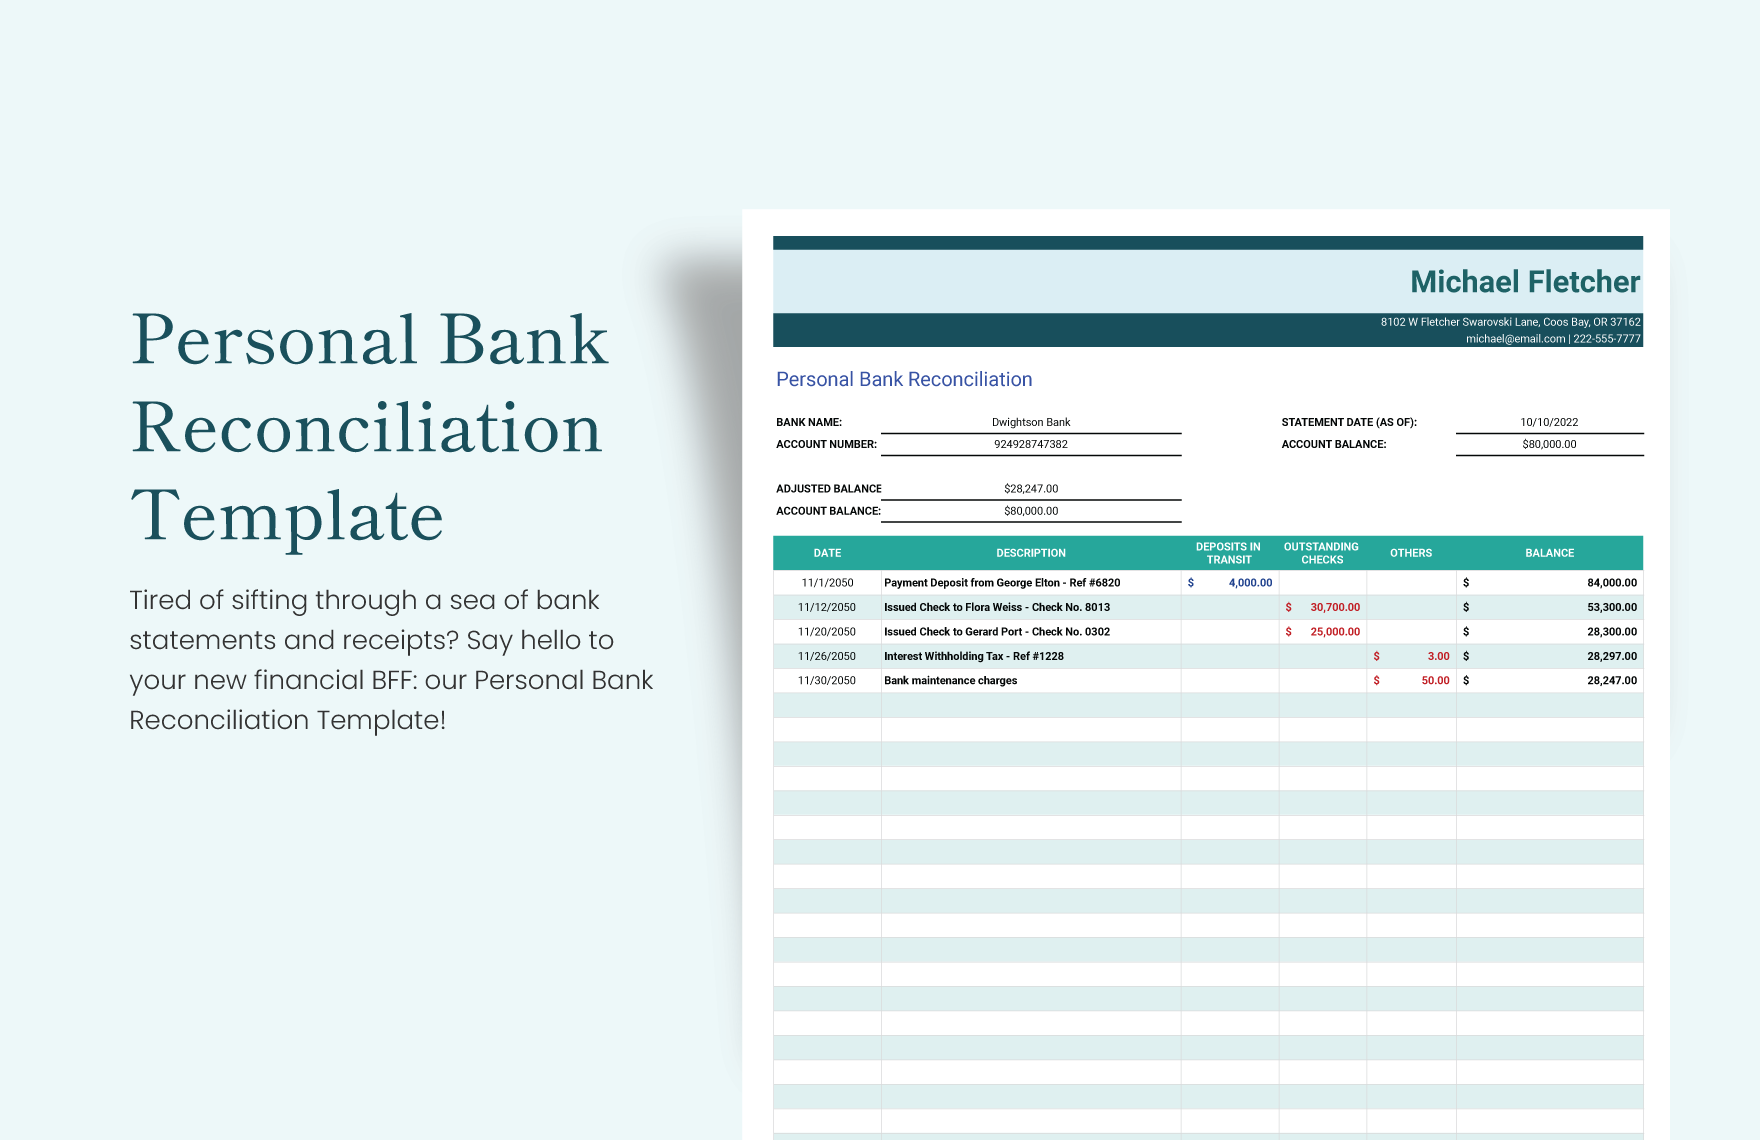 Personal Bank Reconciliation Template